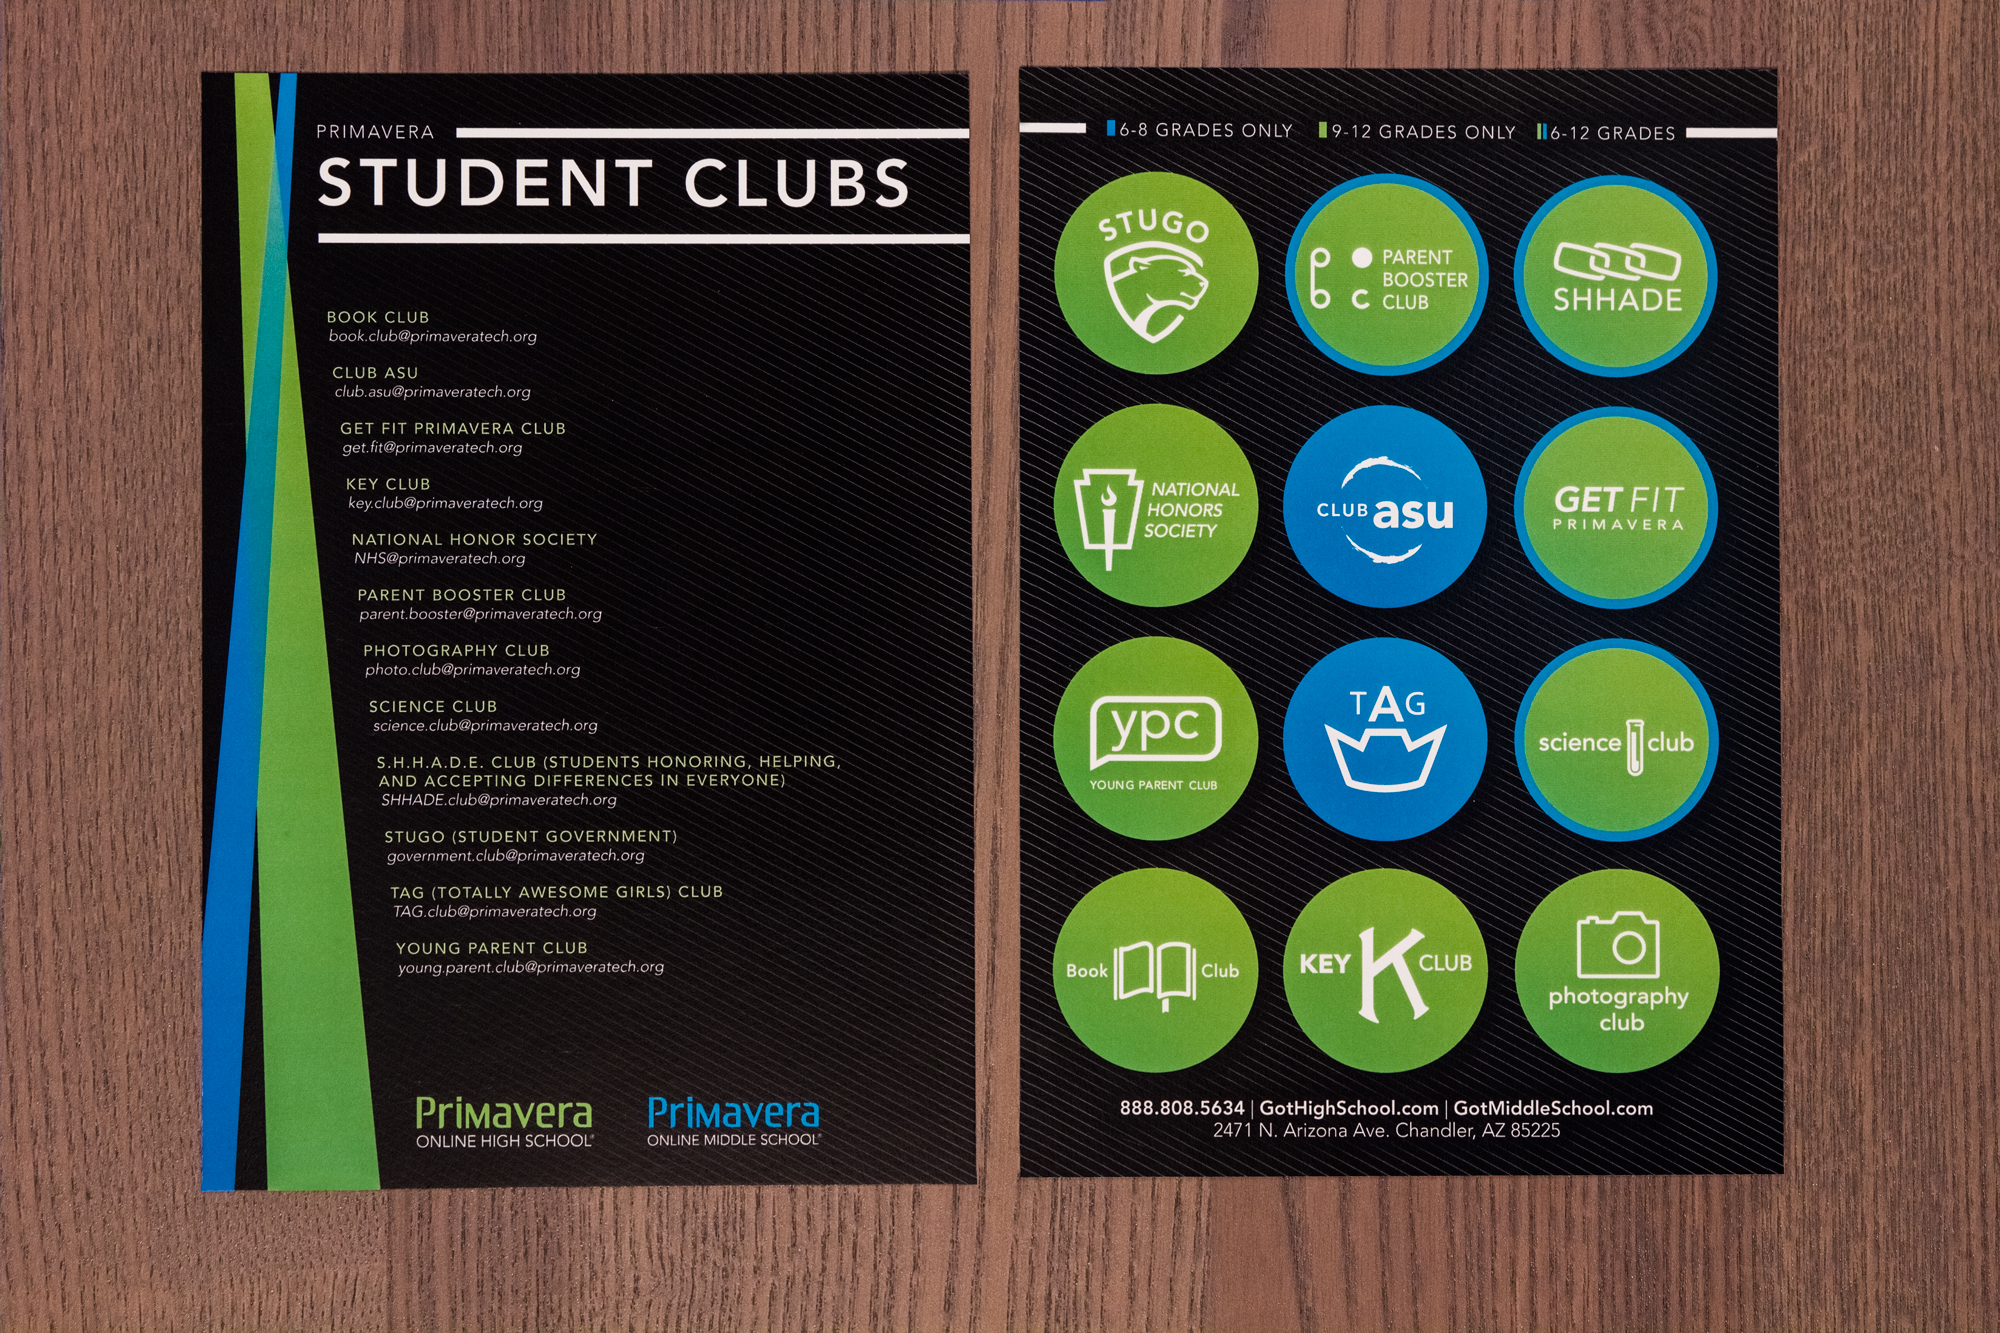  These flyers were passed out to all Primavera students upon enrollment. All students are encouraged to get involved, and this flyer helped them see what was available and how to get more information. 